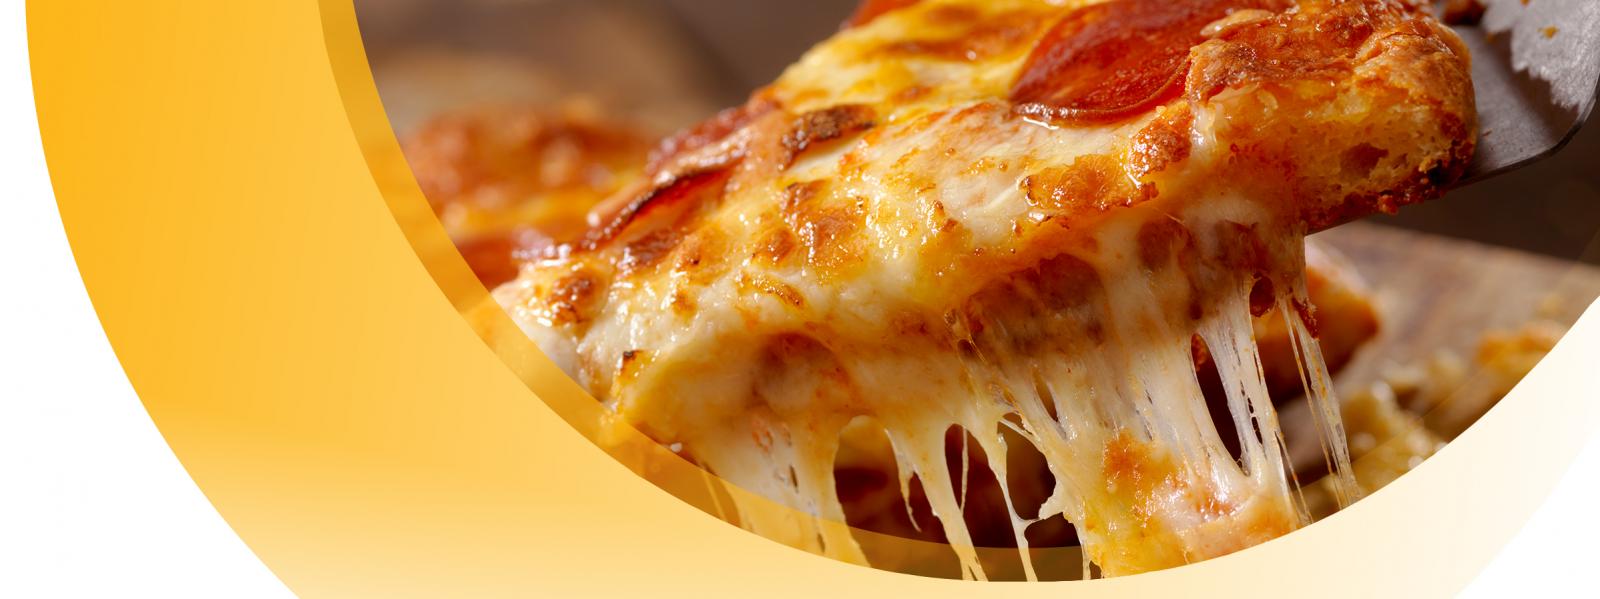 image of CheddMax cheese on a pizza